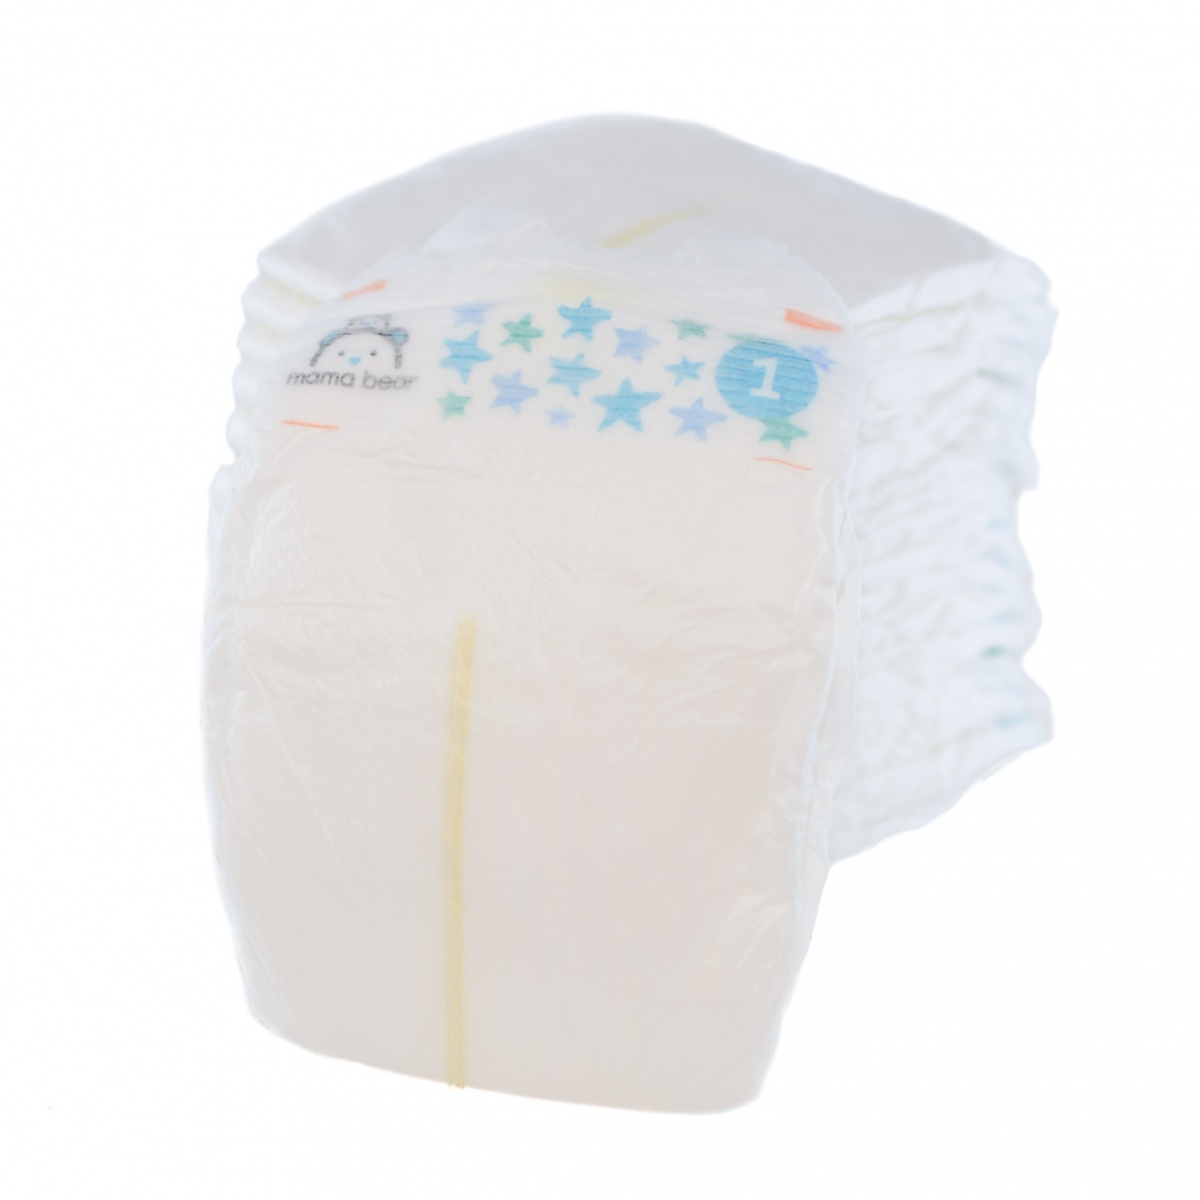 mama bear gentle touch disposable diaper review